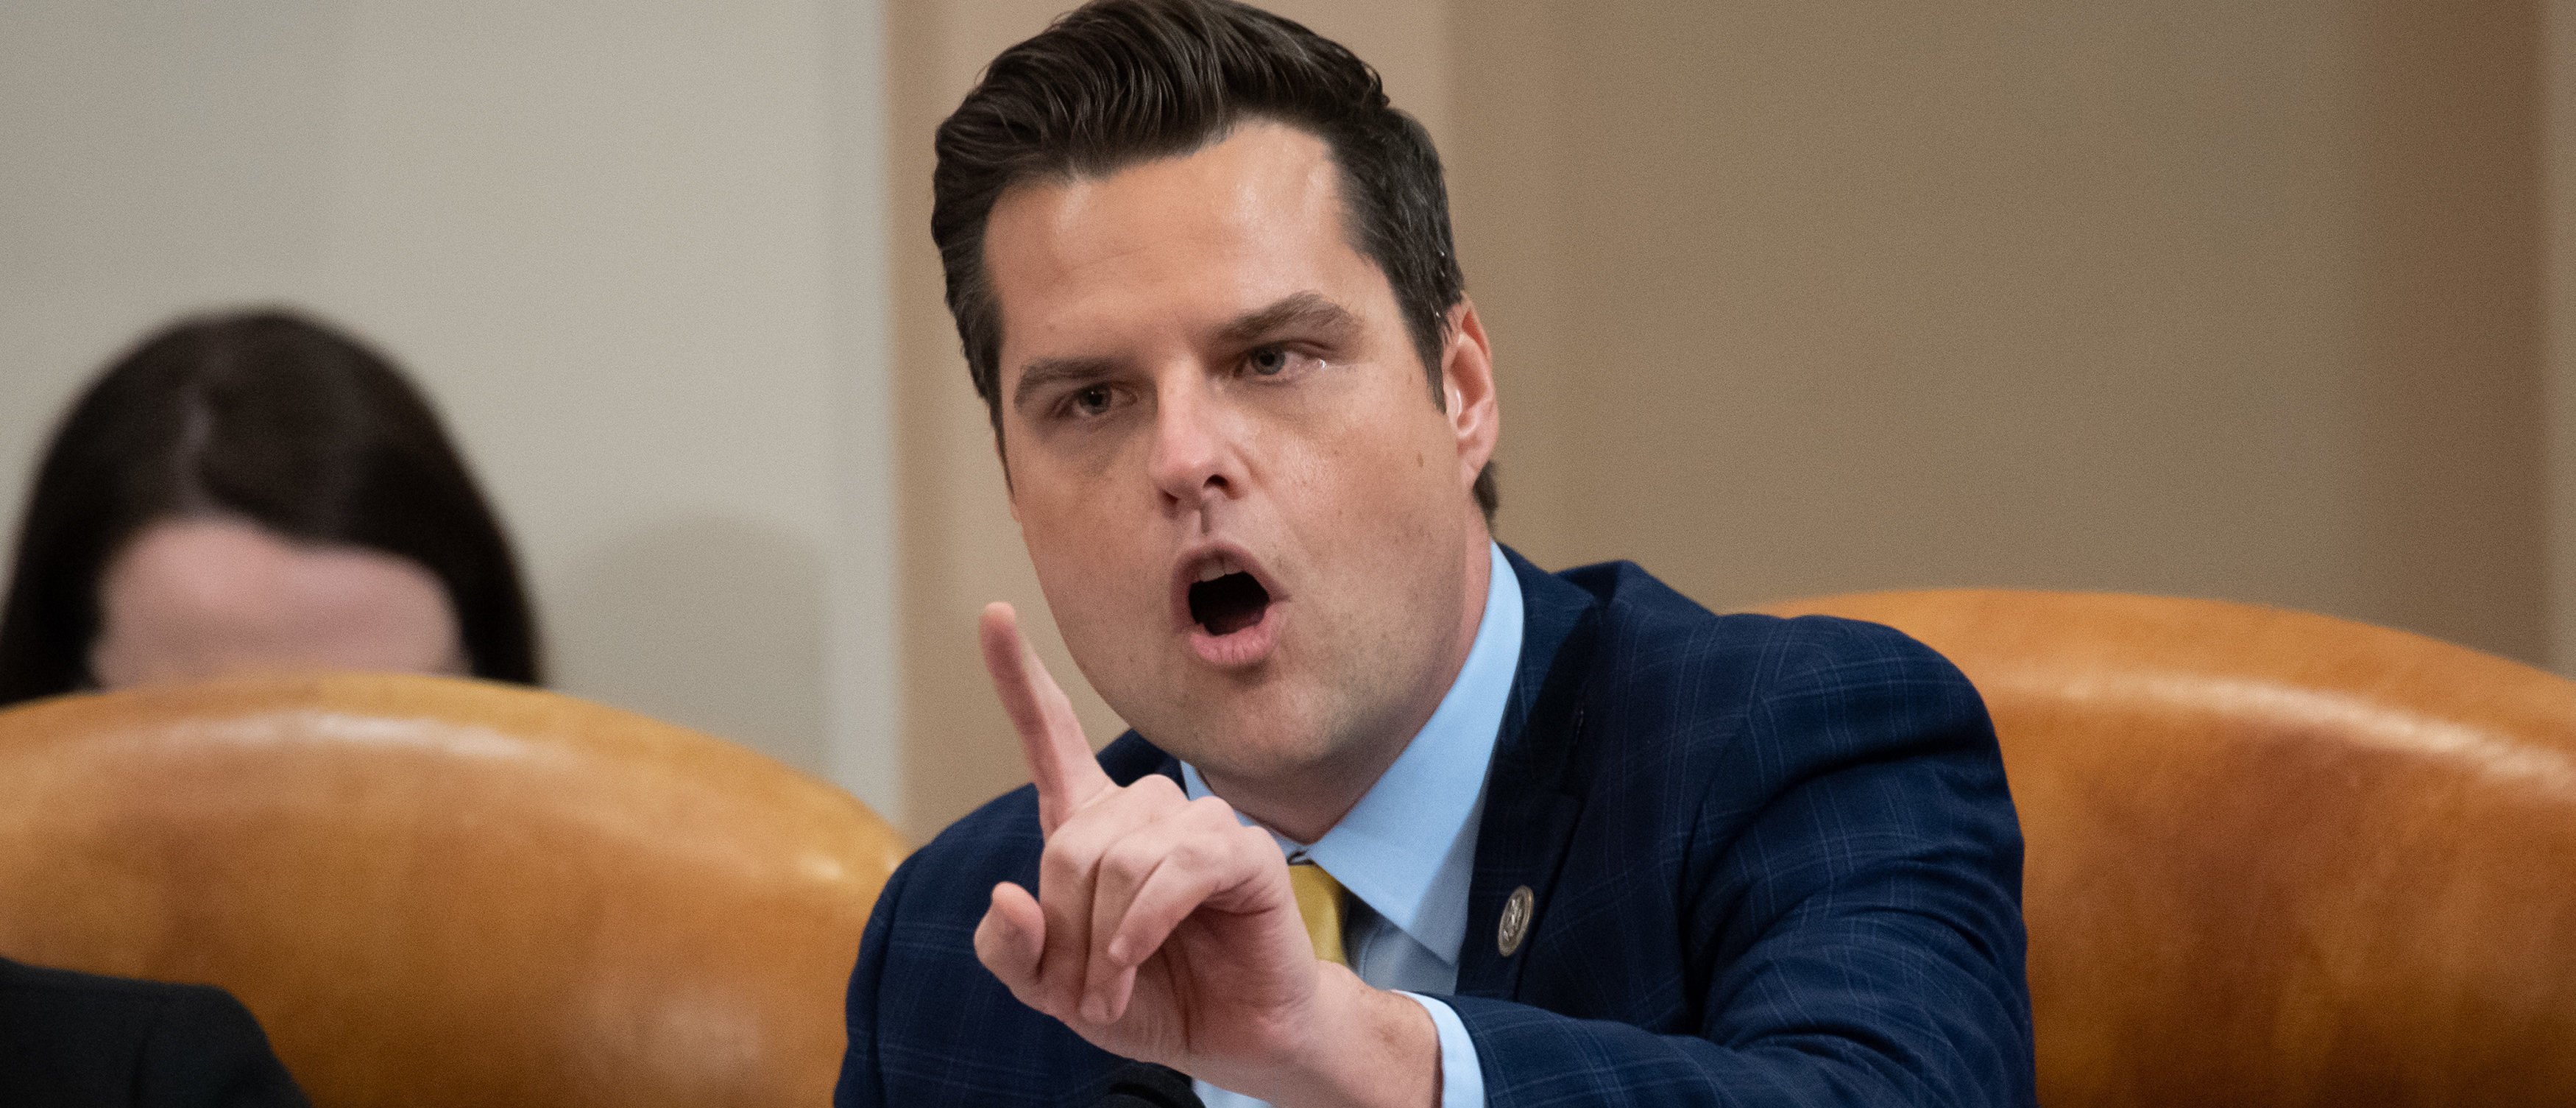 Representative Matt Gaetz, Republican of Florida, questions witnesses at a House Judiciary Committee hearing on the impeachment of US President Donald Trump on Capitol Hill in Washington, DC, December 4, 2019. - The next phase of impeachment begun December 4 in the US Congress, as lawmakers weigh charges against Donald Trump, after the high-stakes inquiry into the president detailed "overwhelming" evidence of abuse of power and obstruction. Four constitutional scholars will testify before the House Judiciary Committee in the first of a series of hearings to establish the gravity of Trump's alleged crimes. (Photo by SAUL LOEB/POOL/AFP via Getty Images)